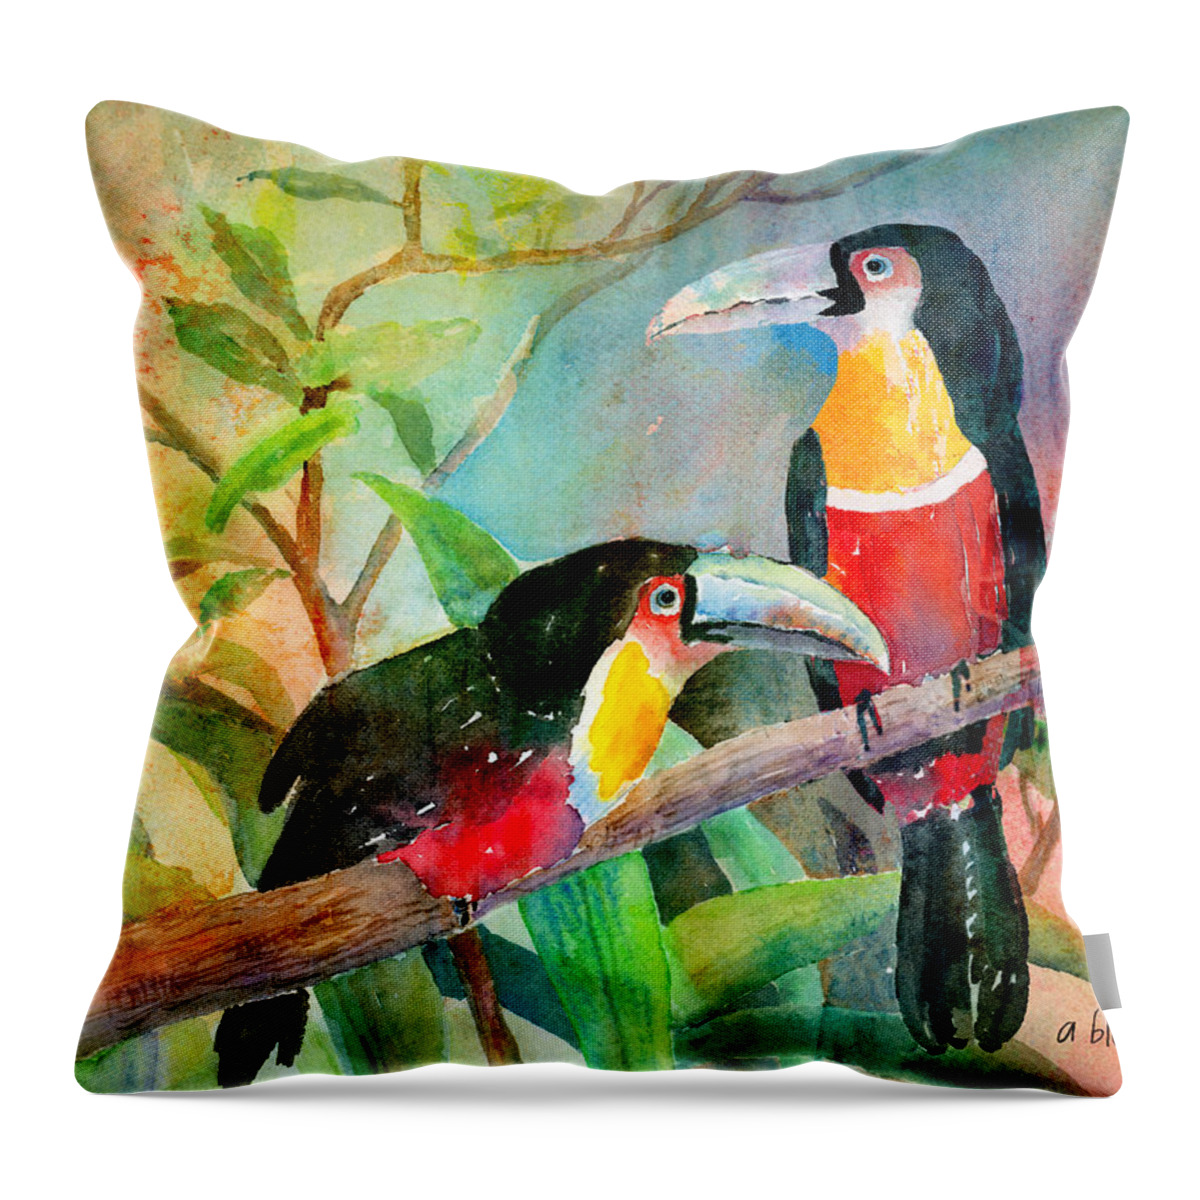 Bird Throw Pillow featuring the painting Red-breasted Toucans by Arline Wagner